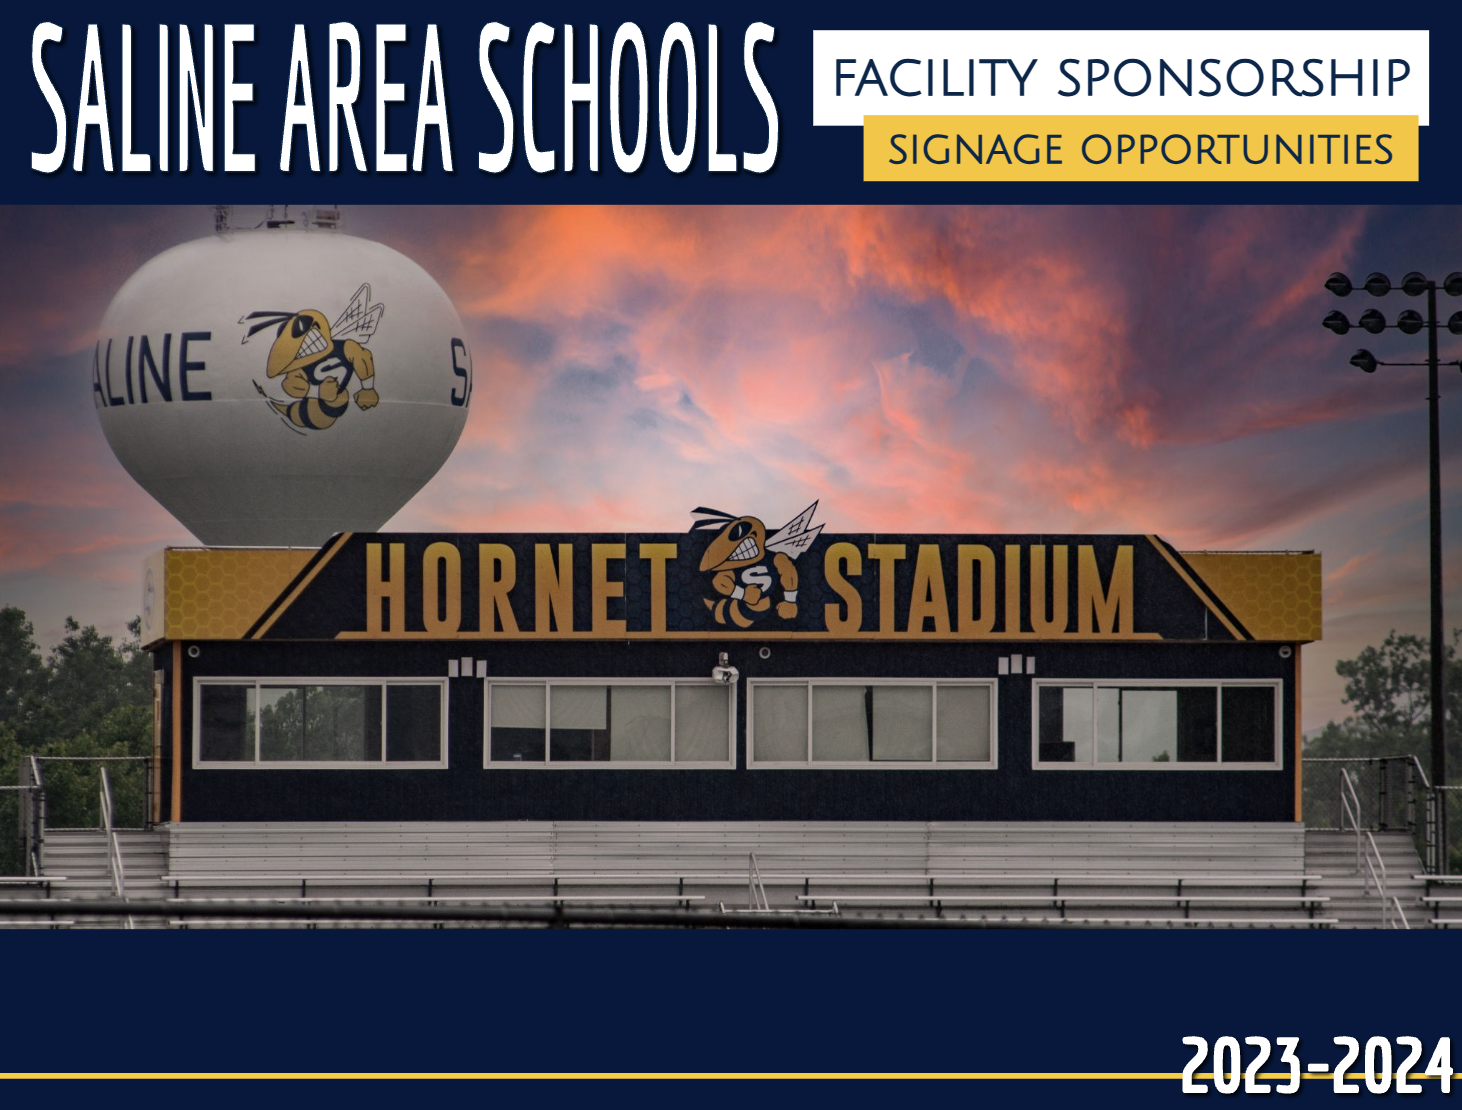 Hornet Stadium Press Box with colorful sunset and Saline Hornet on water tower